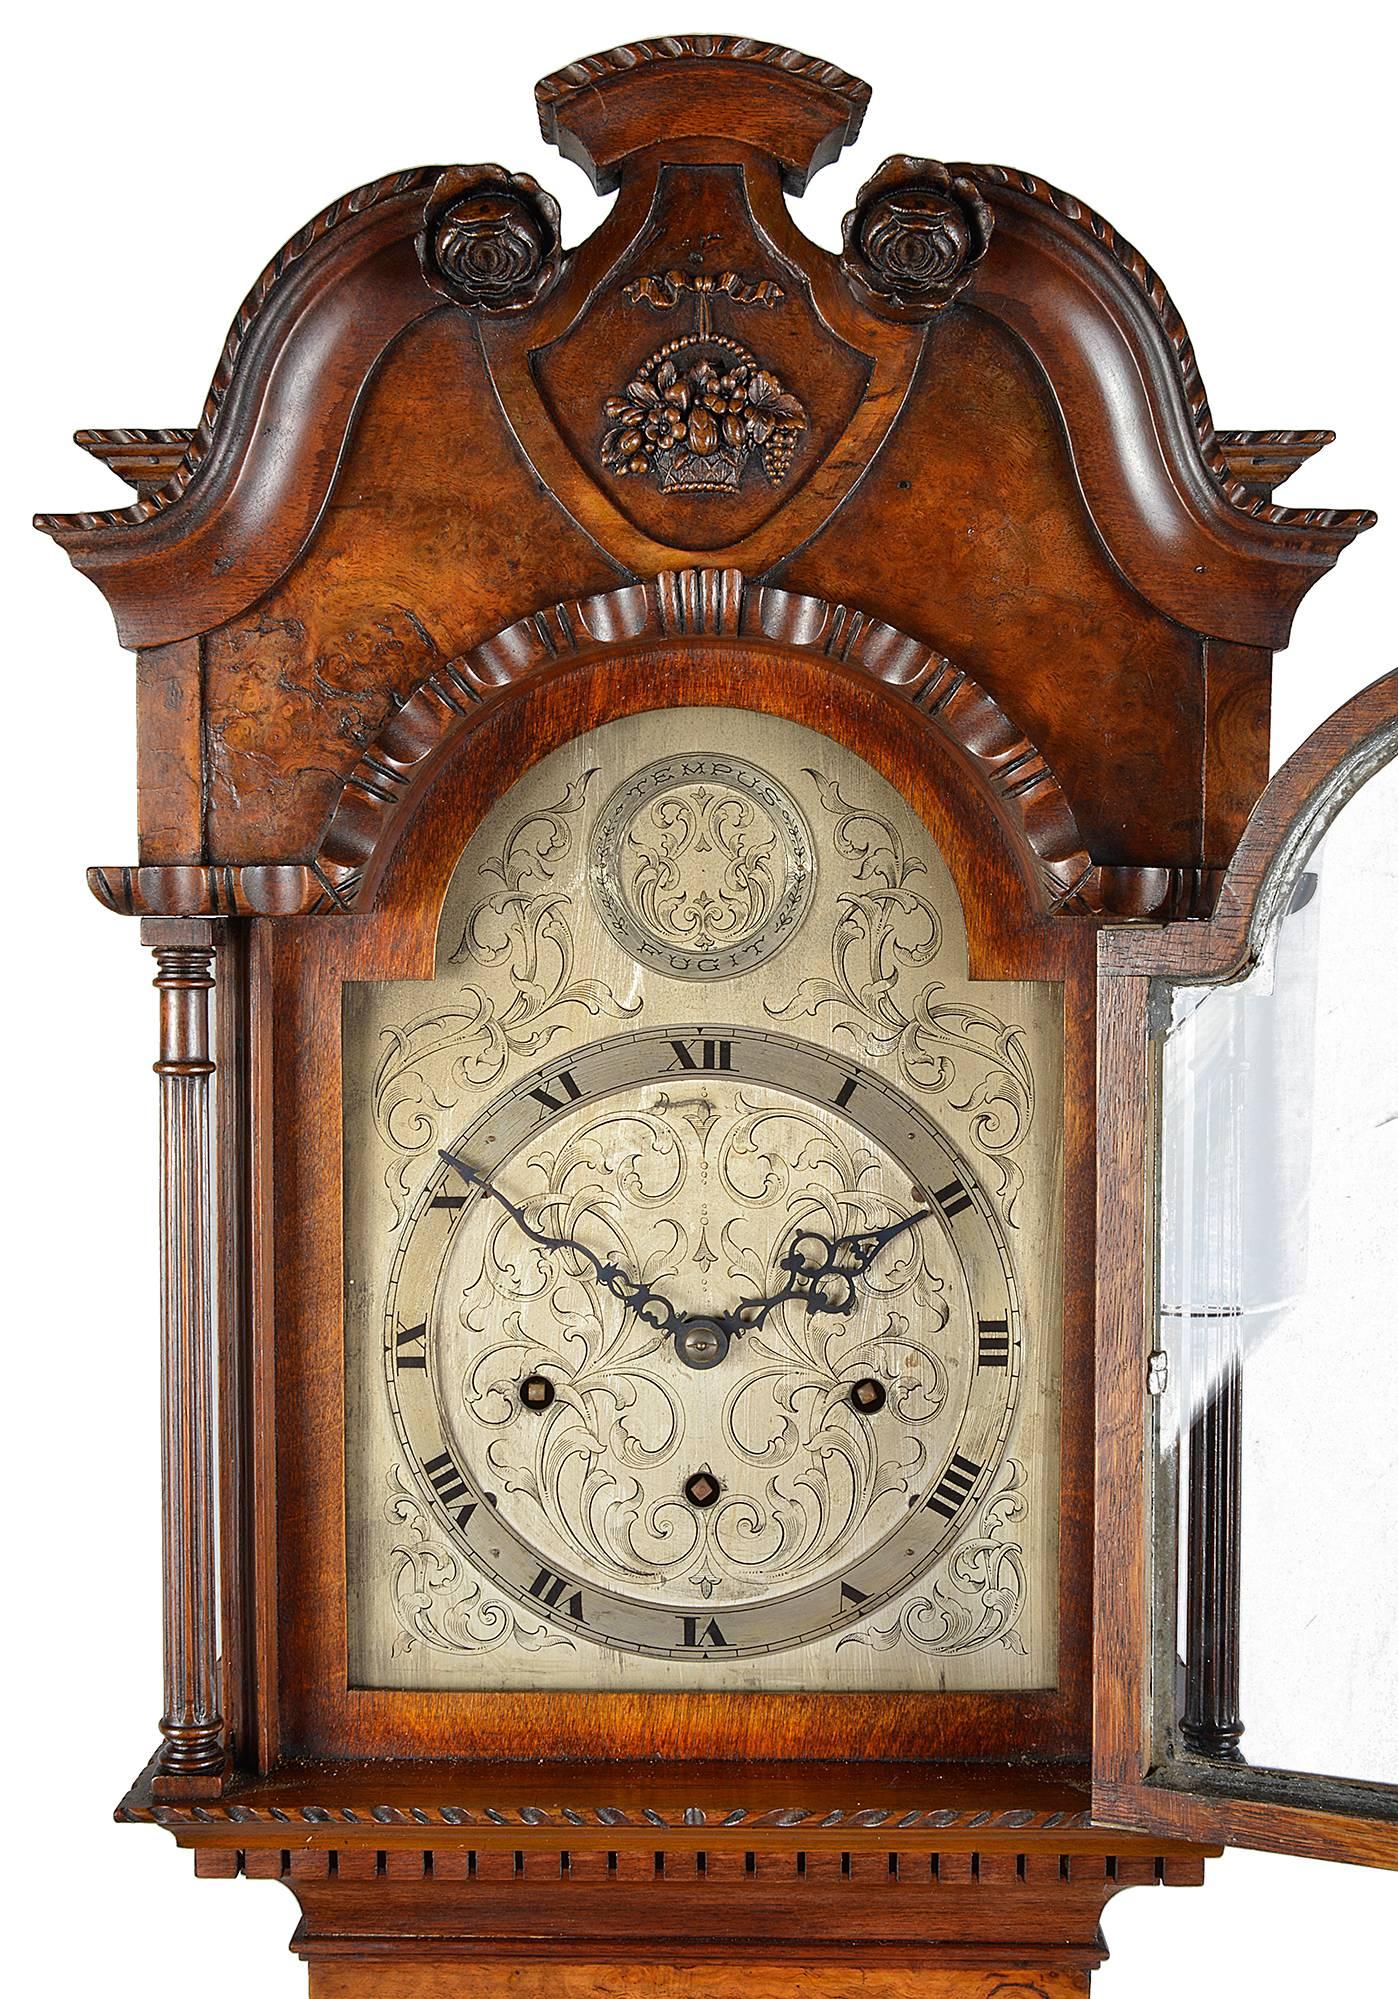 A very good quality Queen Anne style, burr walnut grandmother clock. Having a swan neck pediment, a silvered arch dial clock face, with three train striking movement.